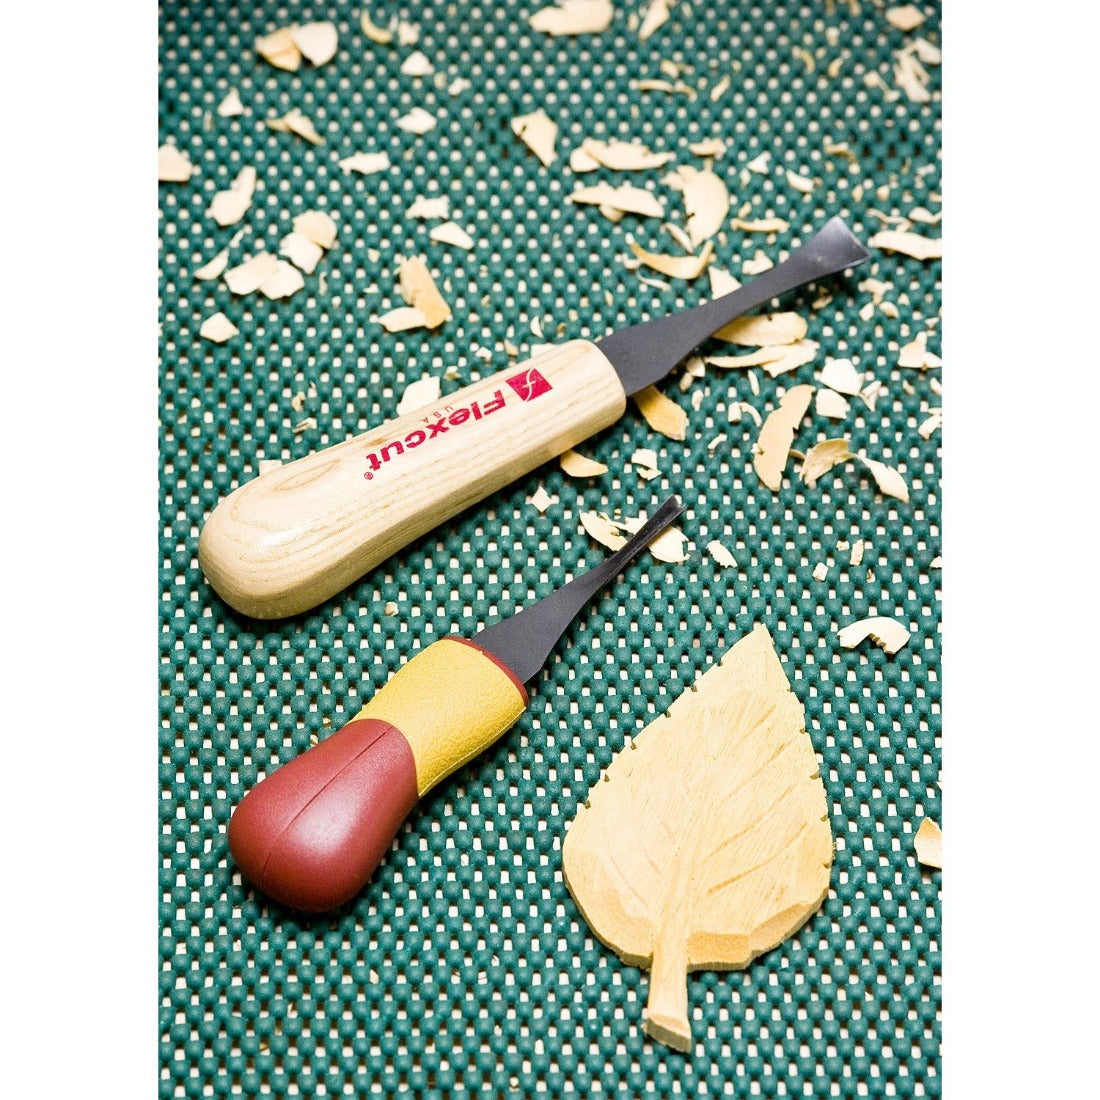 image showing the finished carving work of a leaf carved from basswood. Two knives shown are a gouge and V shaped gouge using the handles from the set.